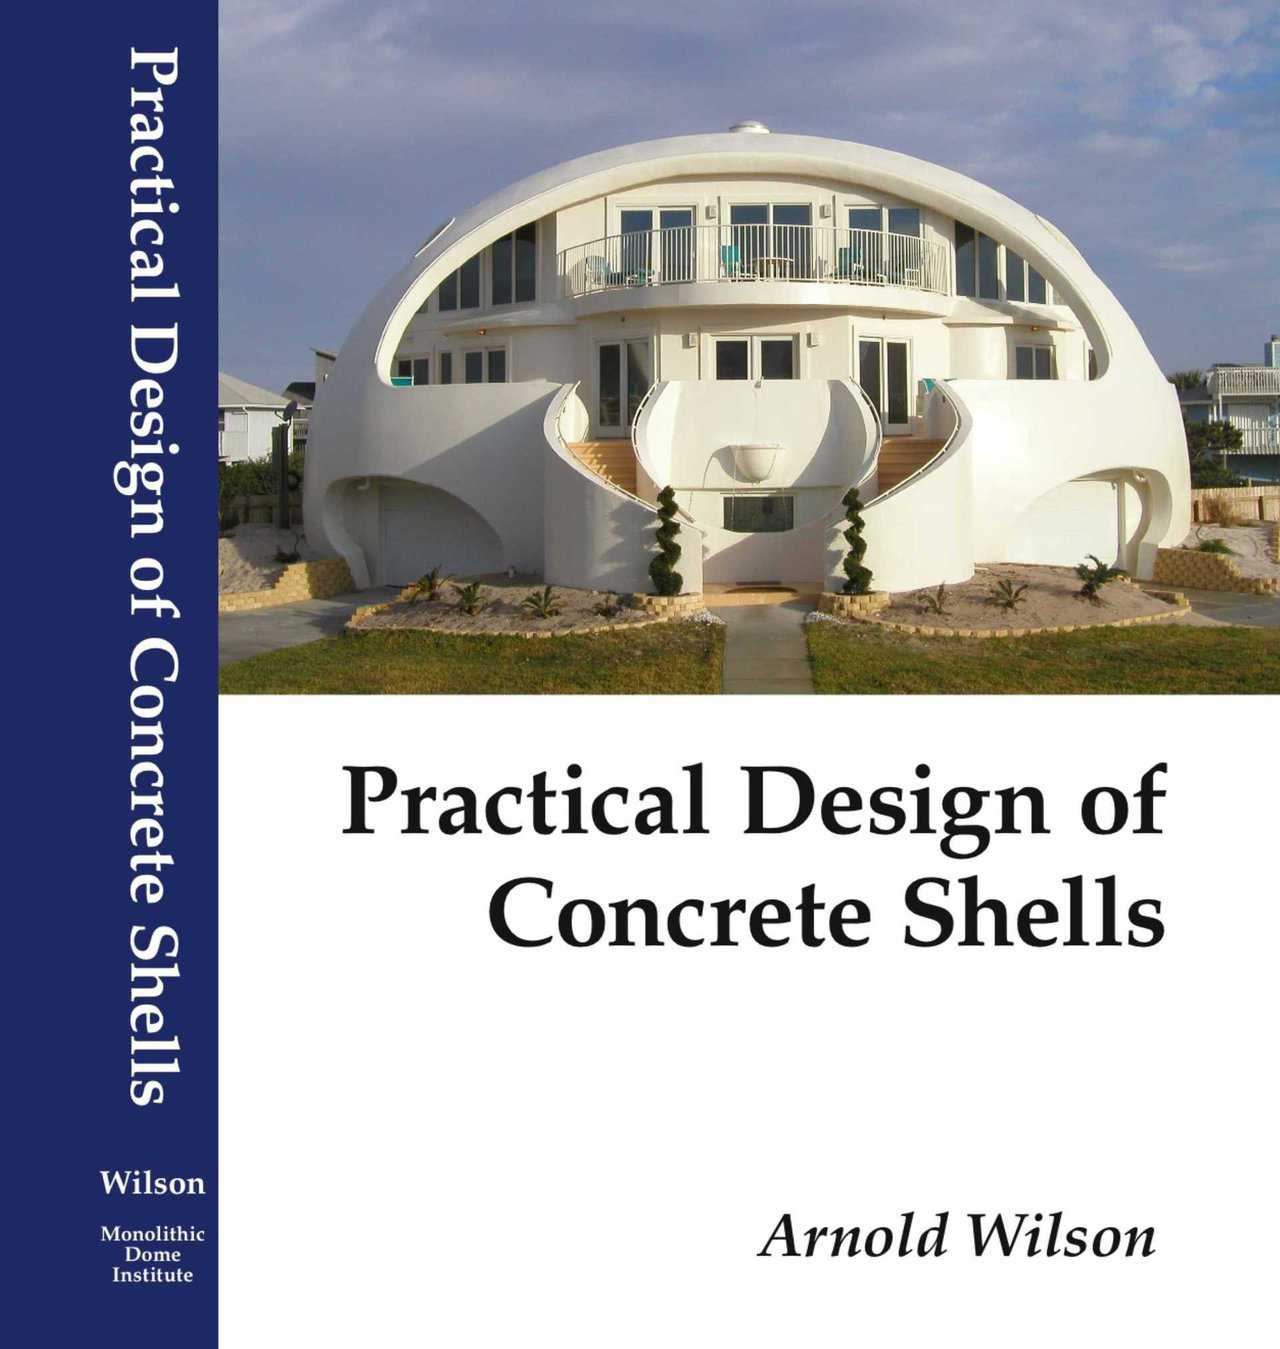 Practical Design of Concrete Shells: An Invaluable Reference Text